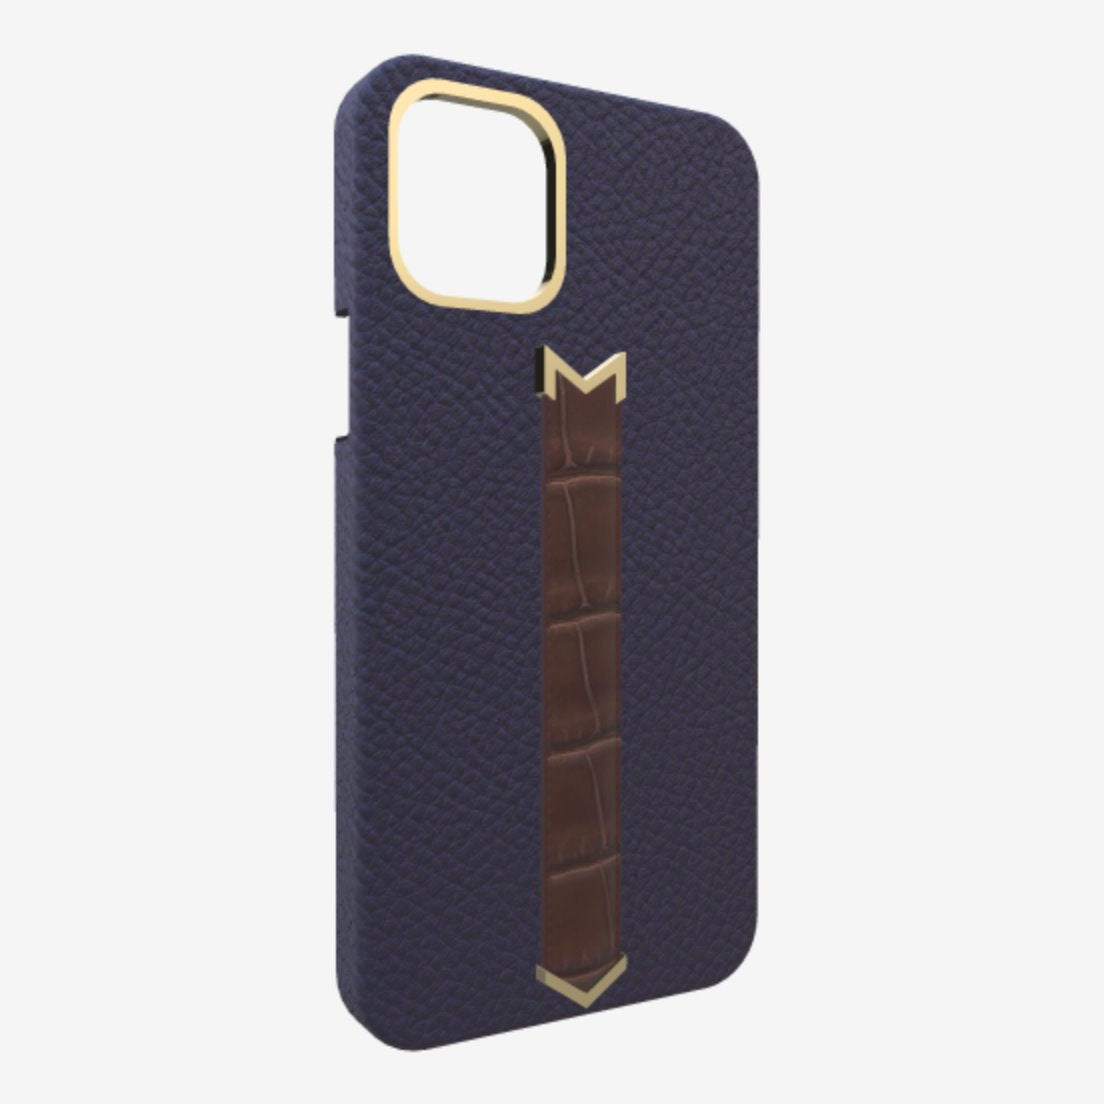 Gold Finger Strap Case for iPhone 13 Pro Max in Genuine Calfskin and Alligator Navy Blue Borsalino Brown 